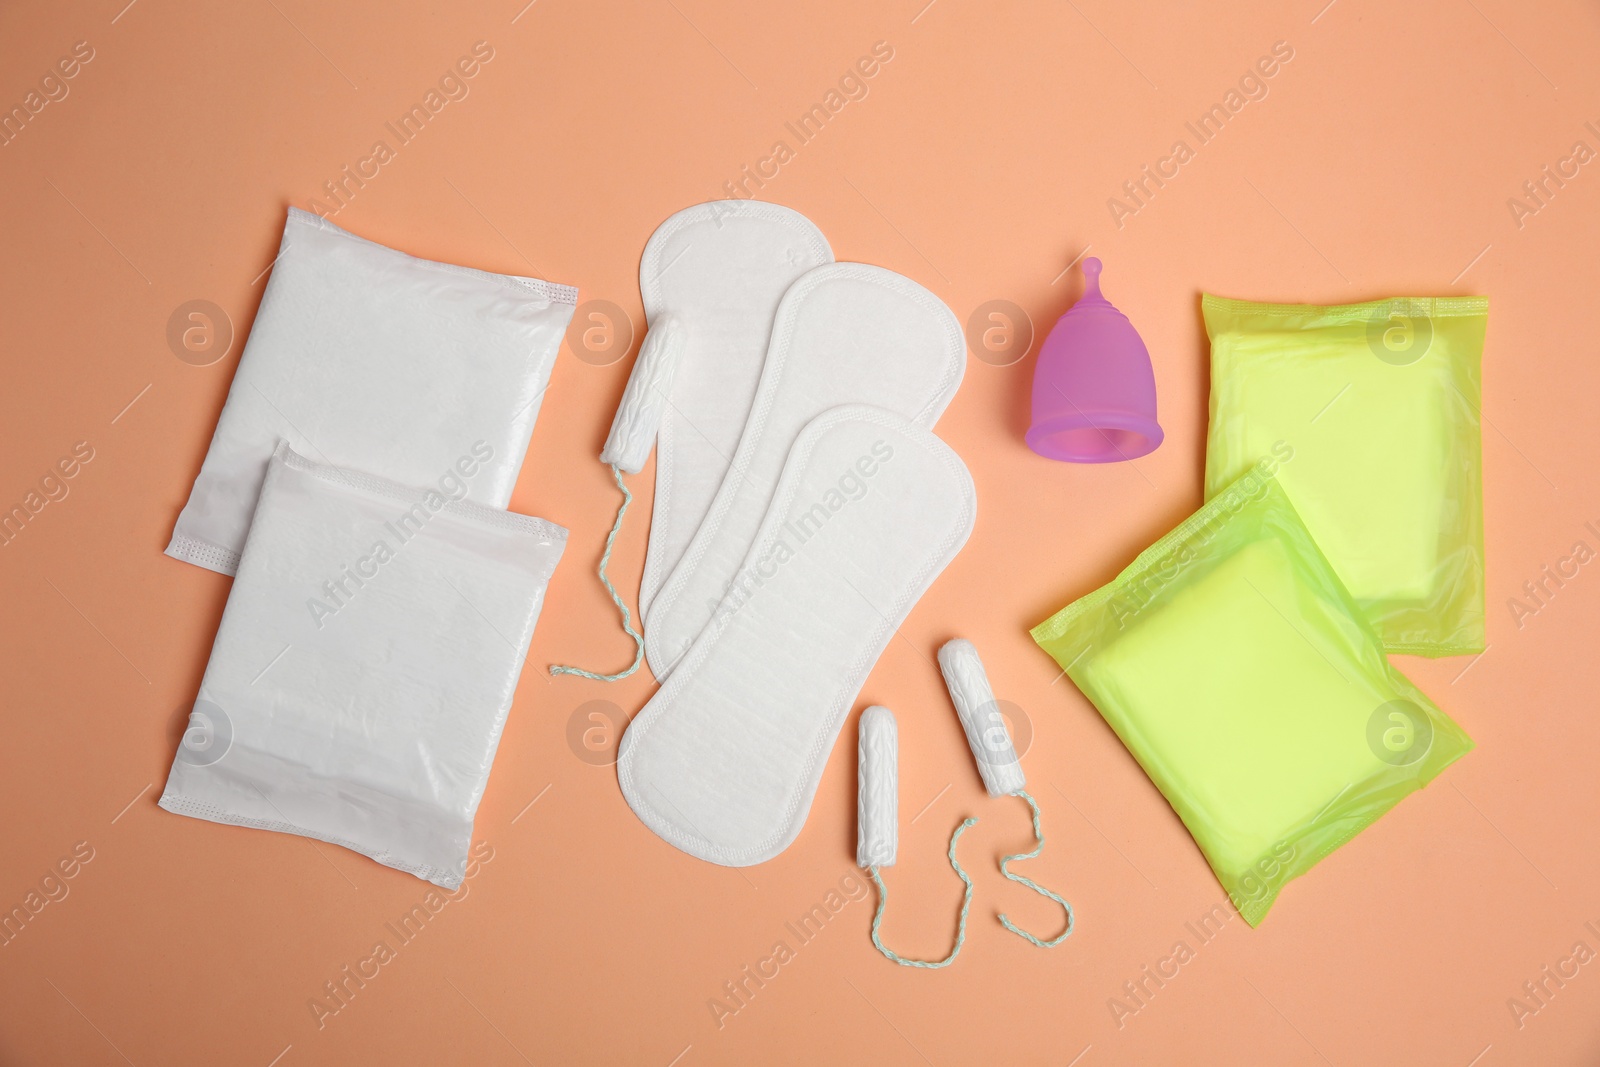 Photo of Menstrual pads and other period products on pale orange background, flat lay